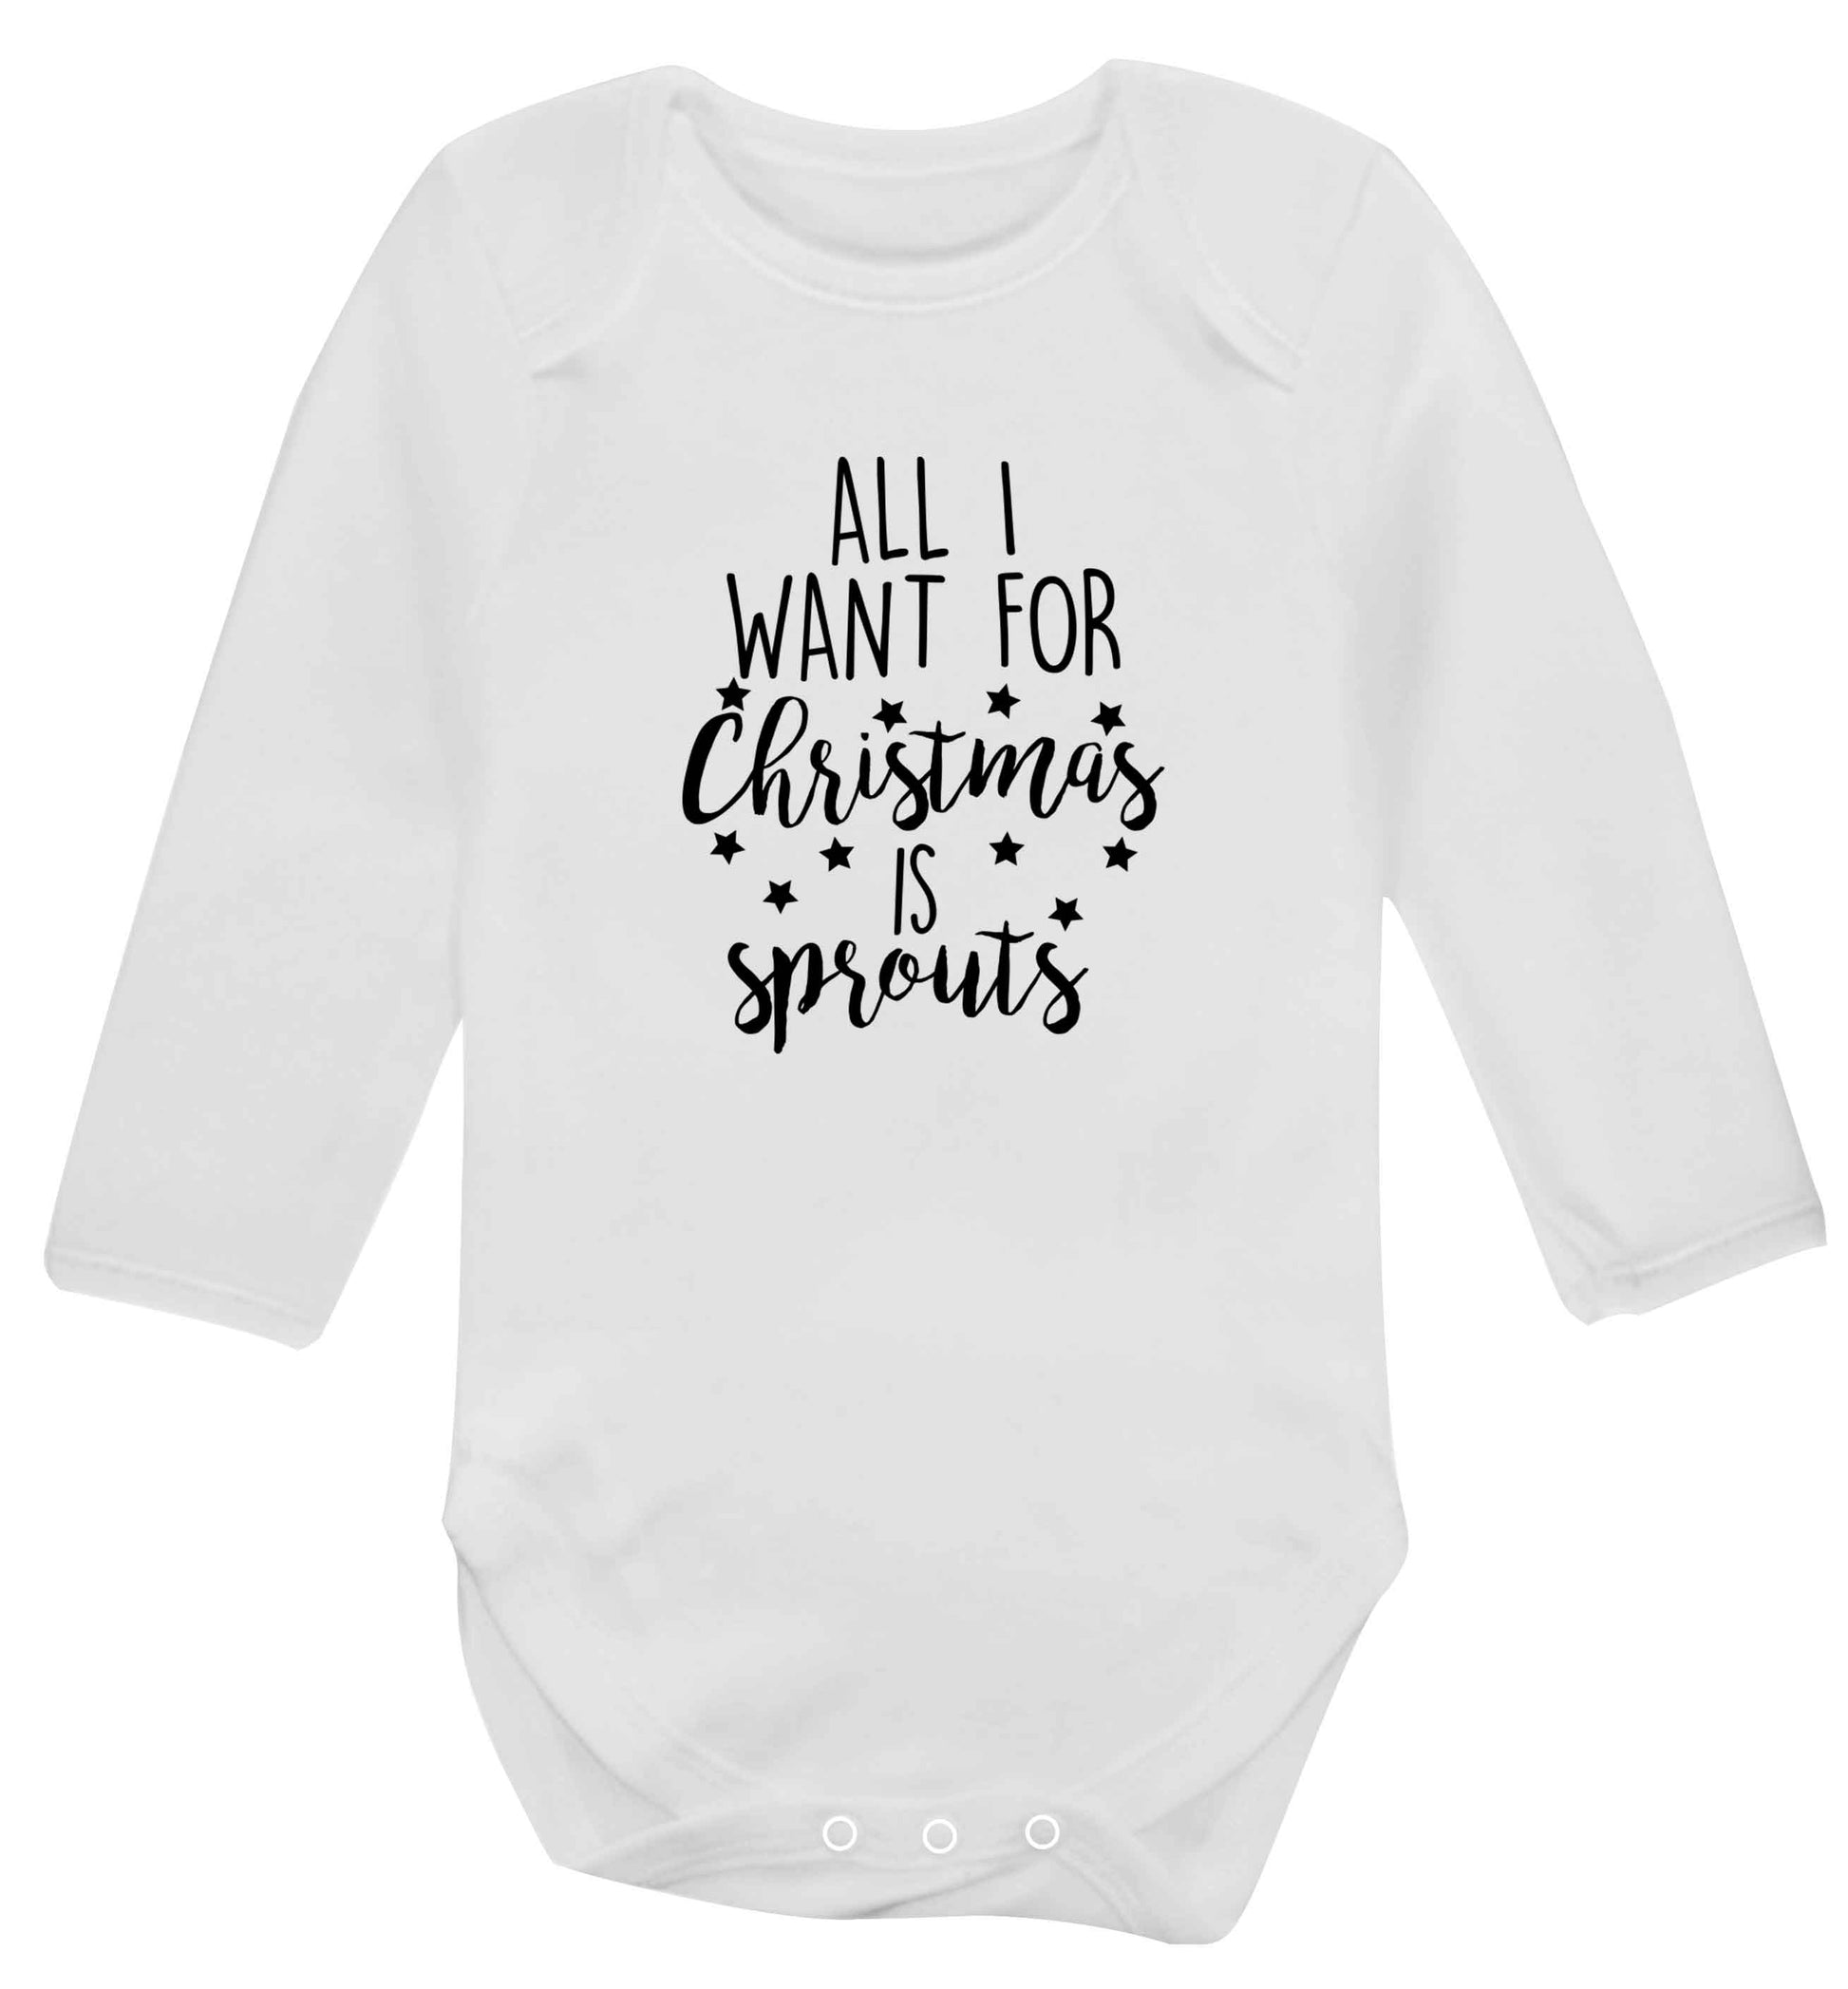 All I want for Christmas is sprouts baby vest long sleeved white 6-12 months